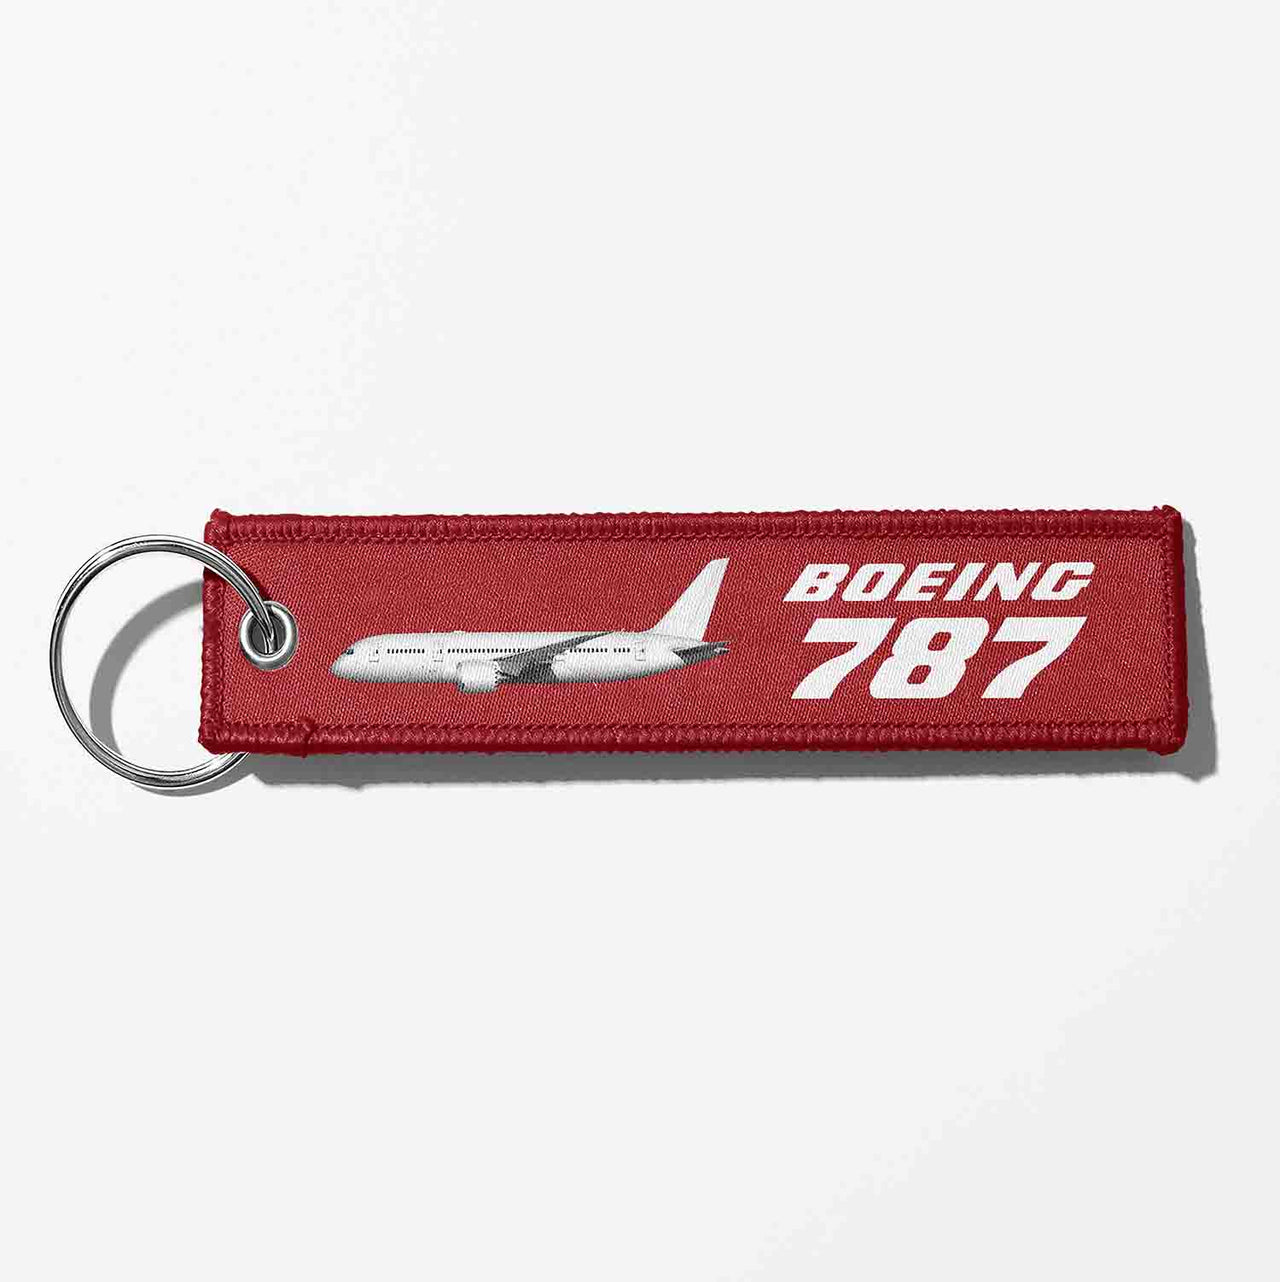 The Boeing 787 Designed Key Chains